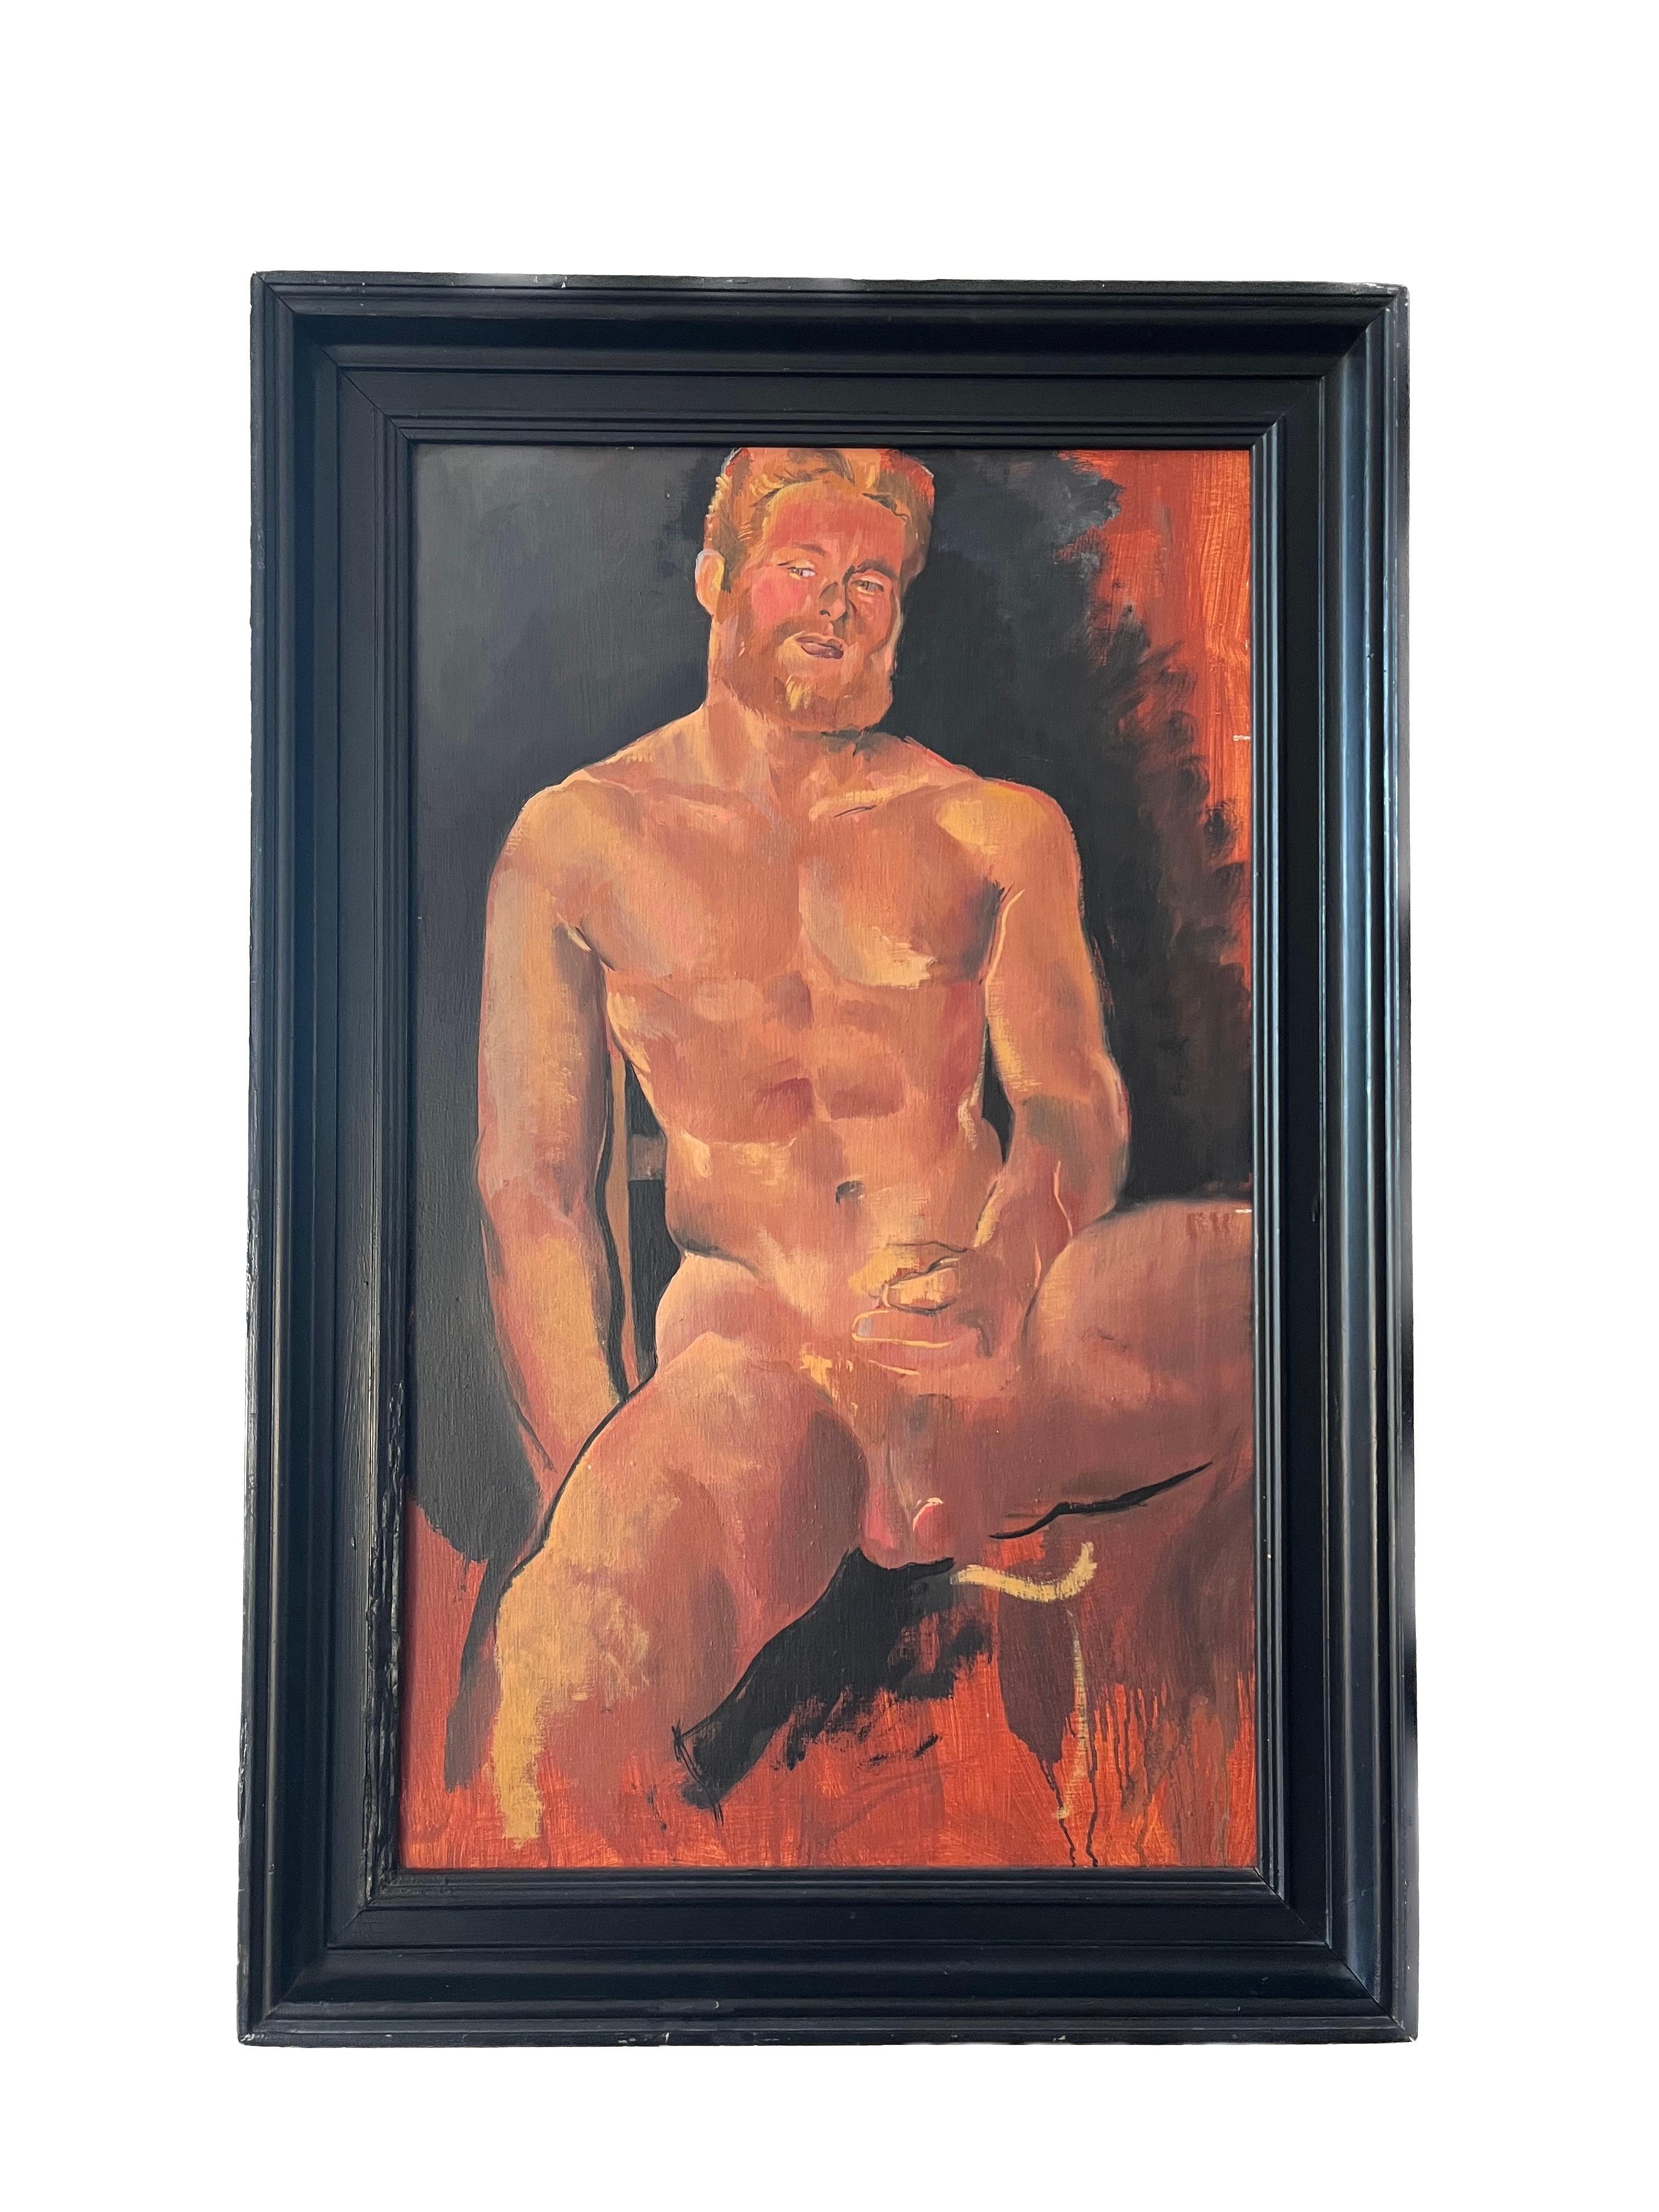 1980s Erotic nude male portrait of artist's lover, Iconic piece from gay history